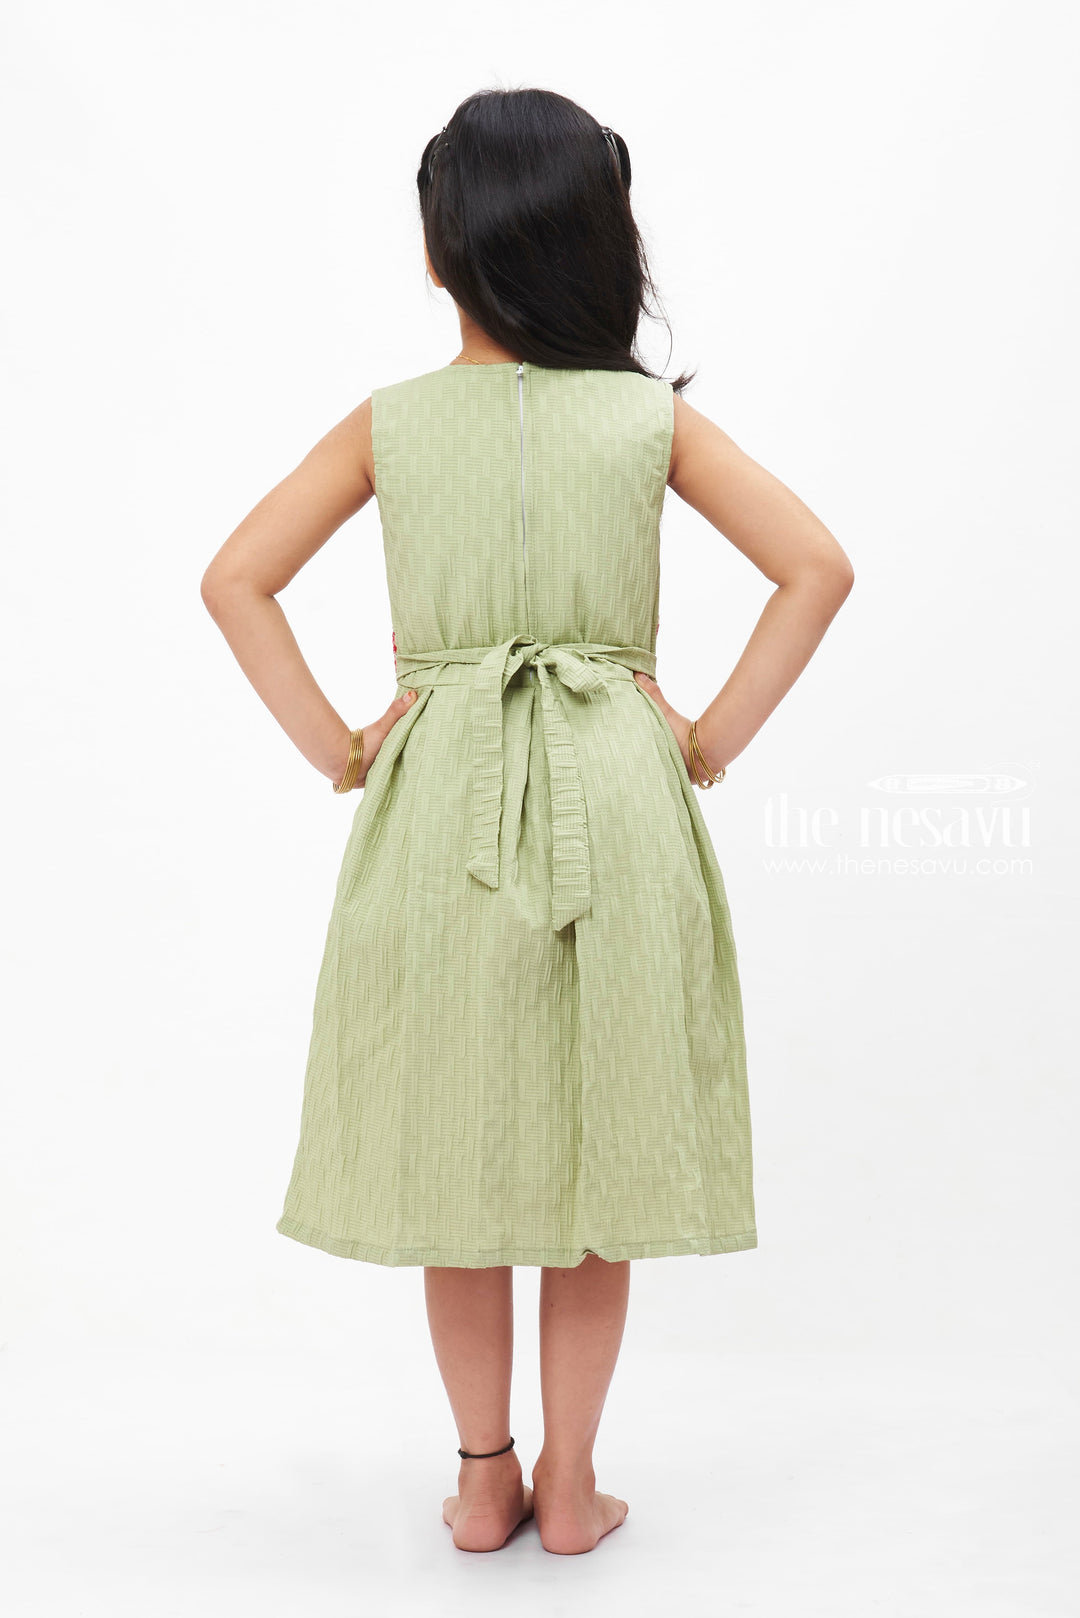 The Nesavu Girls Fancy Frock Sage Elegance Pleated Cotton Dress: Serene Green with Delicate Collar for Girls Nesavu Girls' Sage Green Pleated Dress | Cotton Collar Frock for Kids | The Nesavu